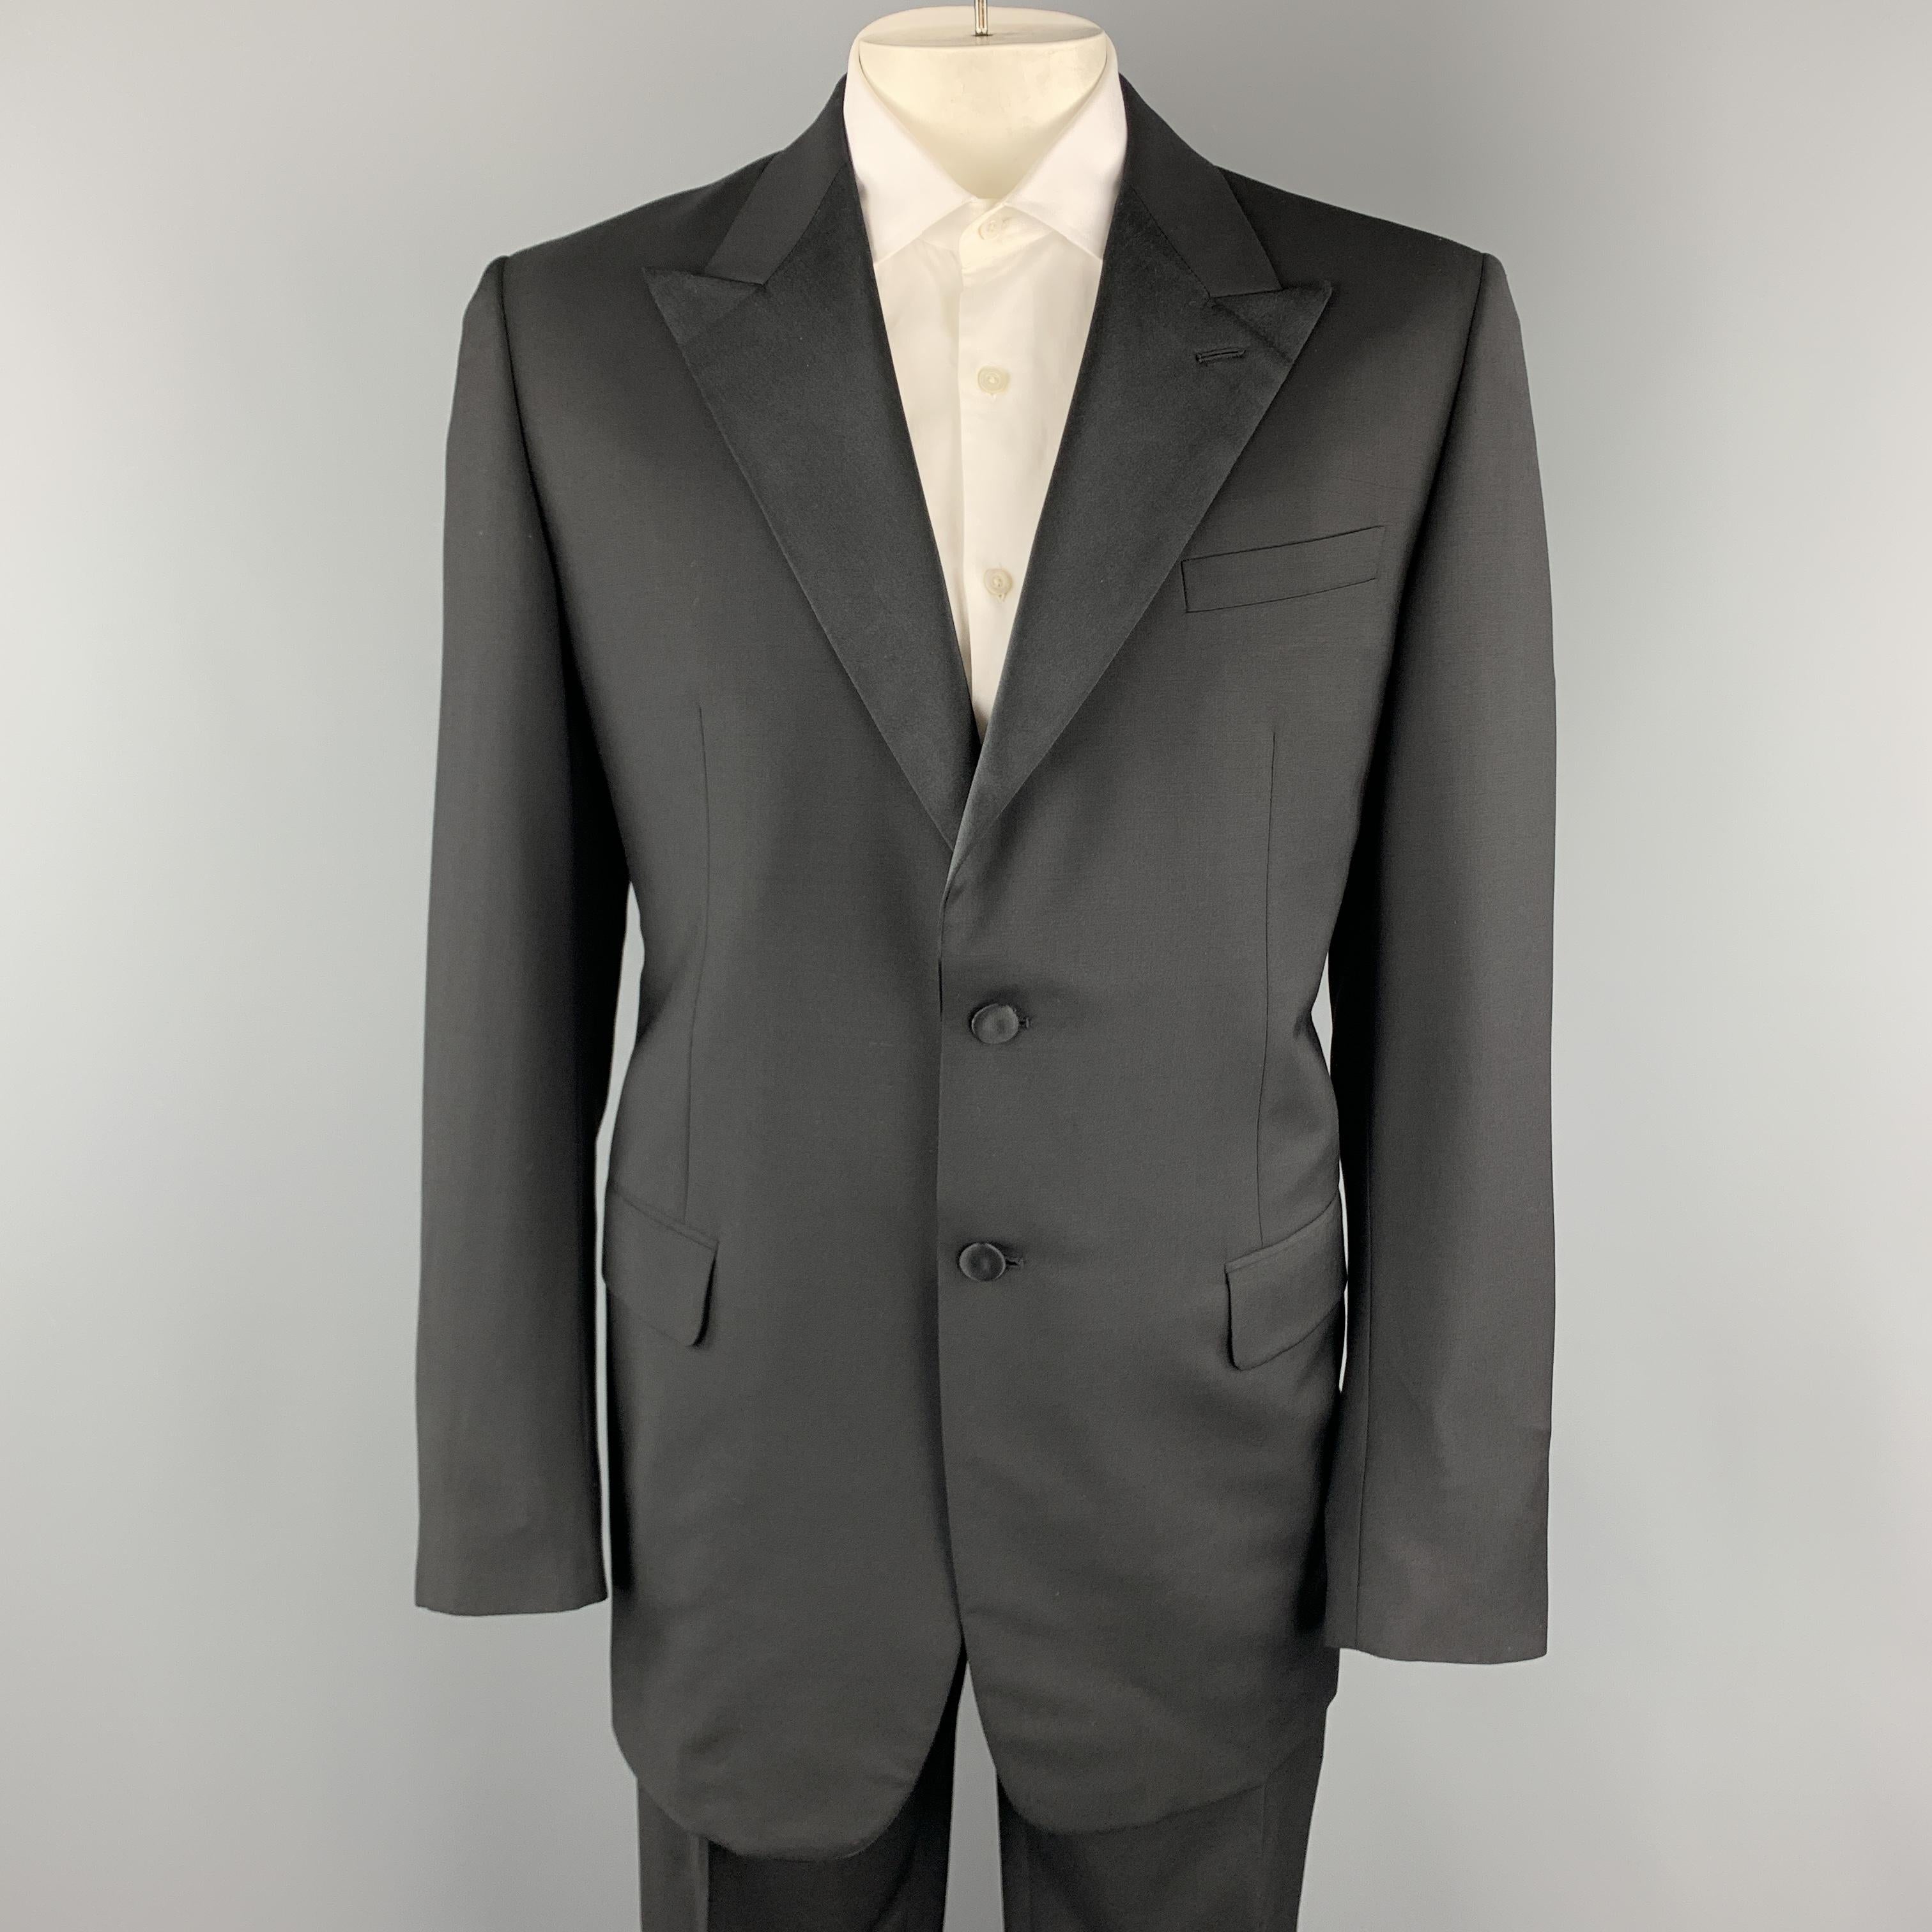 PRADA tuxedo suit comes in black virgin wool mohair blend and includes a single breasted, two button sport coat with satin peak lapel and matching flat front satin waistband trousers. Made in Italy.

Excellent Pre-Owned Condition.
Marked: IT